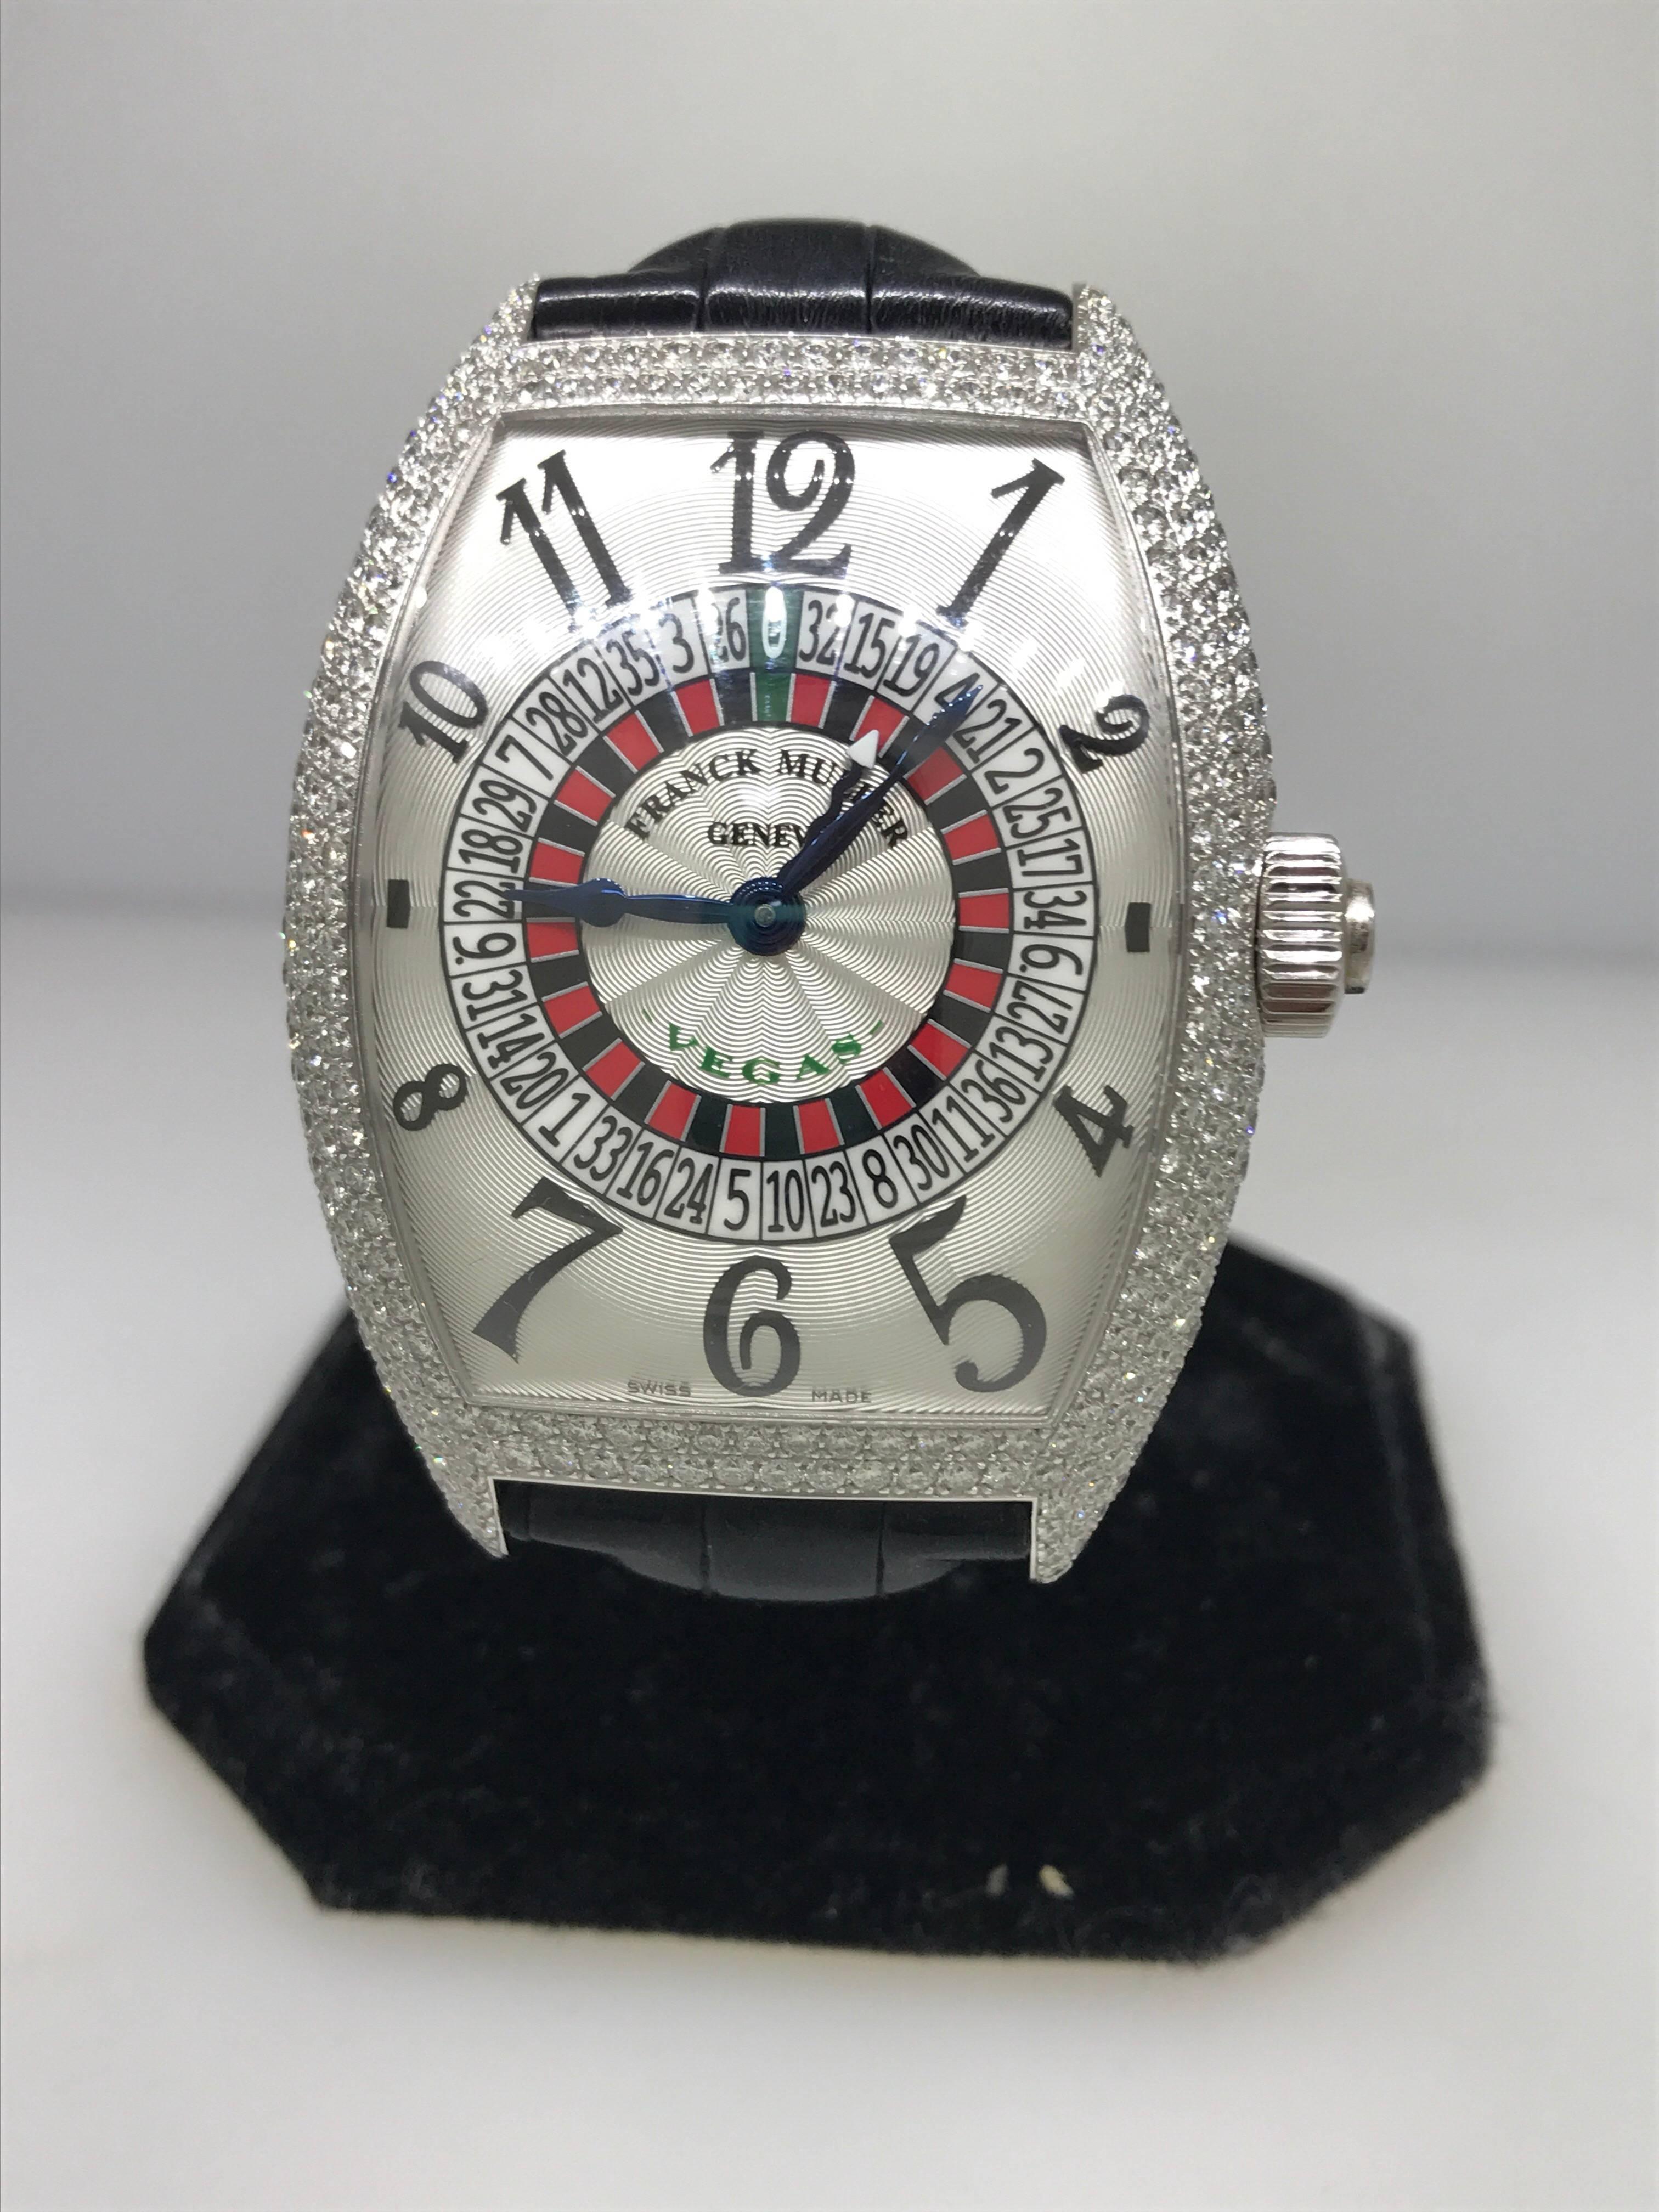 Franck Muller Casablanca XXL Men's watch

Model Number 9880 VEGAS D 7

100% Authentic

New

Comes with original Franck Muller box 

Stainless Steel Case and buckle

7 rows of diamonds on the case

Case Dimensions: 60mm x 43mm

Black crocodile